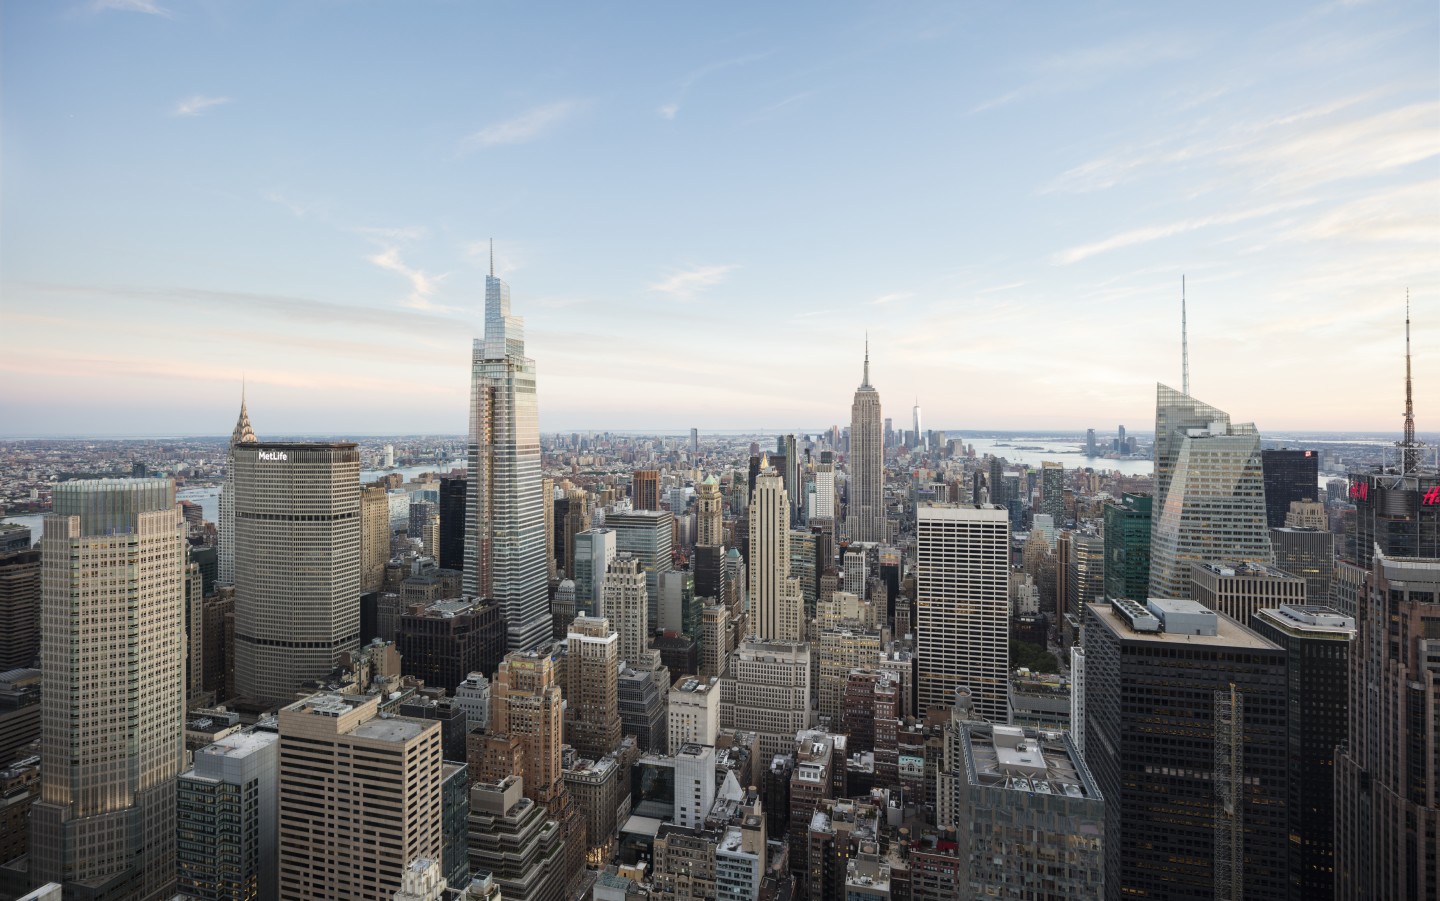 During One Vanderbilt's design, KPF drew inspiration from iconic towers like the Chrysler Building and Empire State Building